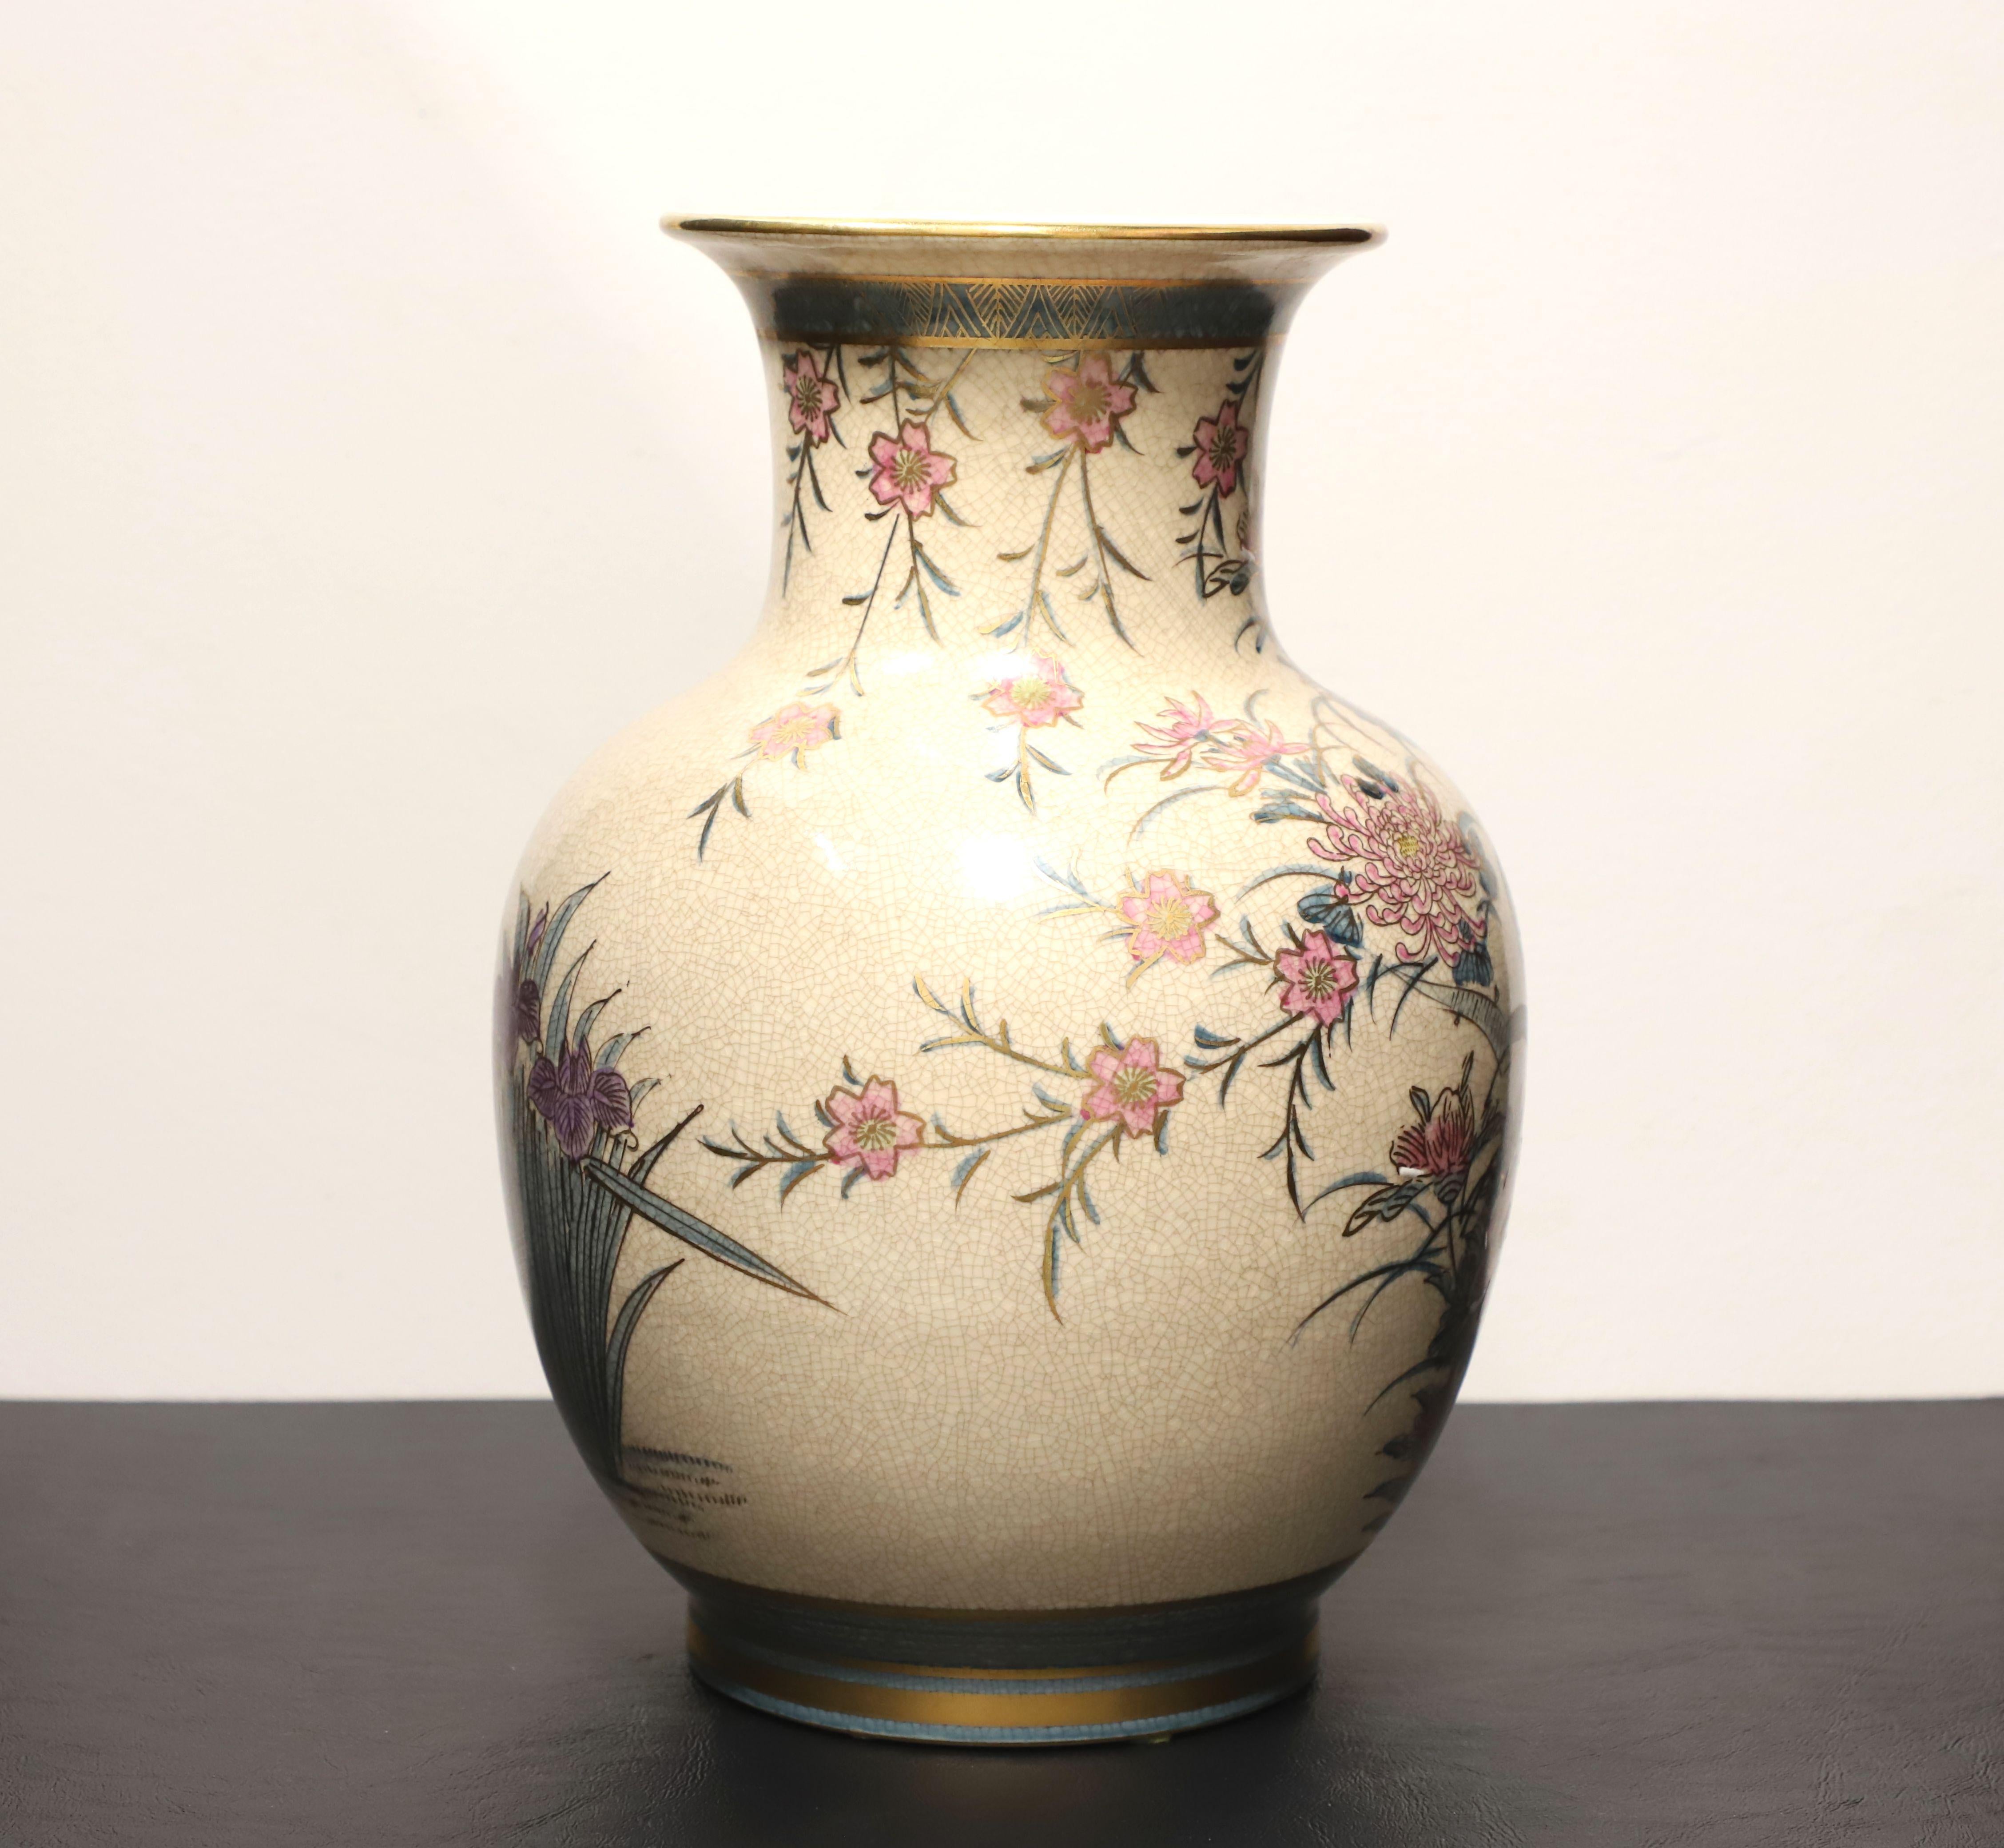 A Japanese Chinoiserie style table vase by Andrea by Sadek. Hand painted ceramic with a Japanese Chinoiserie design of foliate, floral & birds in colorful shades of tan, gold, blue, pink, purple, white & brown colors, and a tapered urn shape with